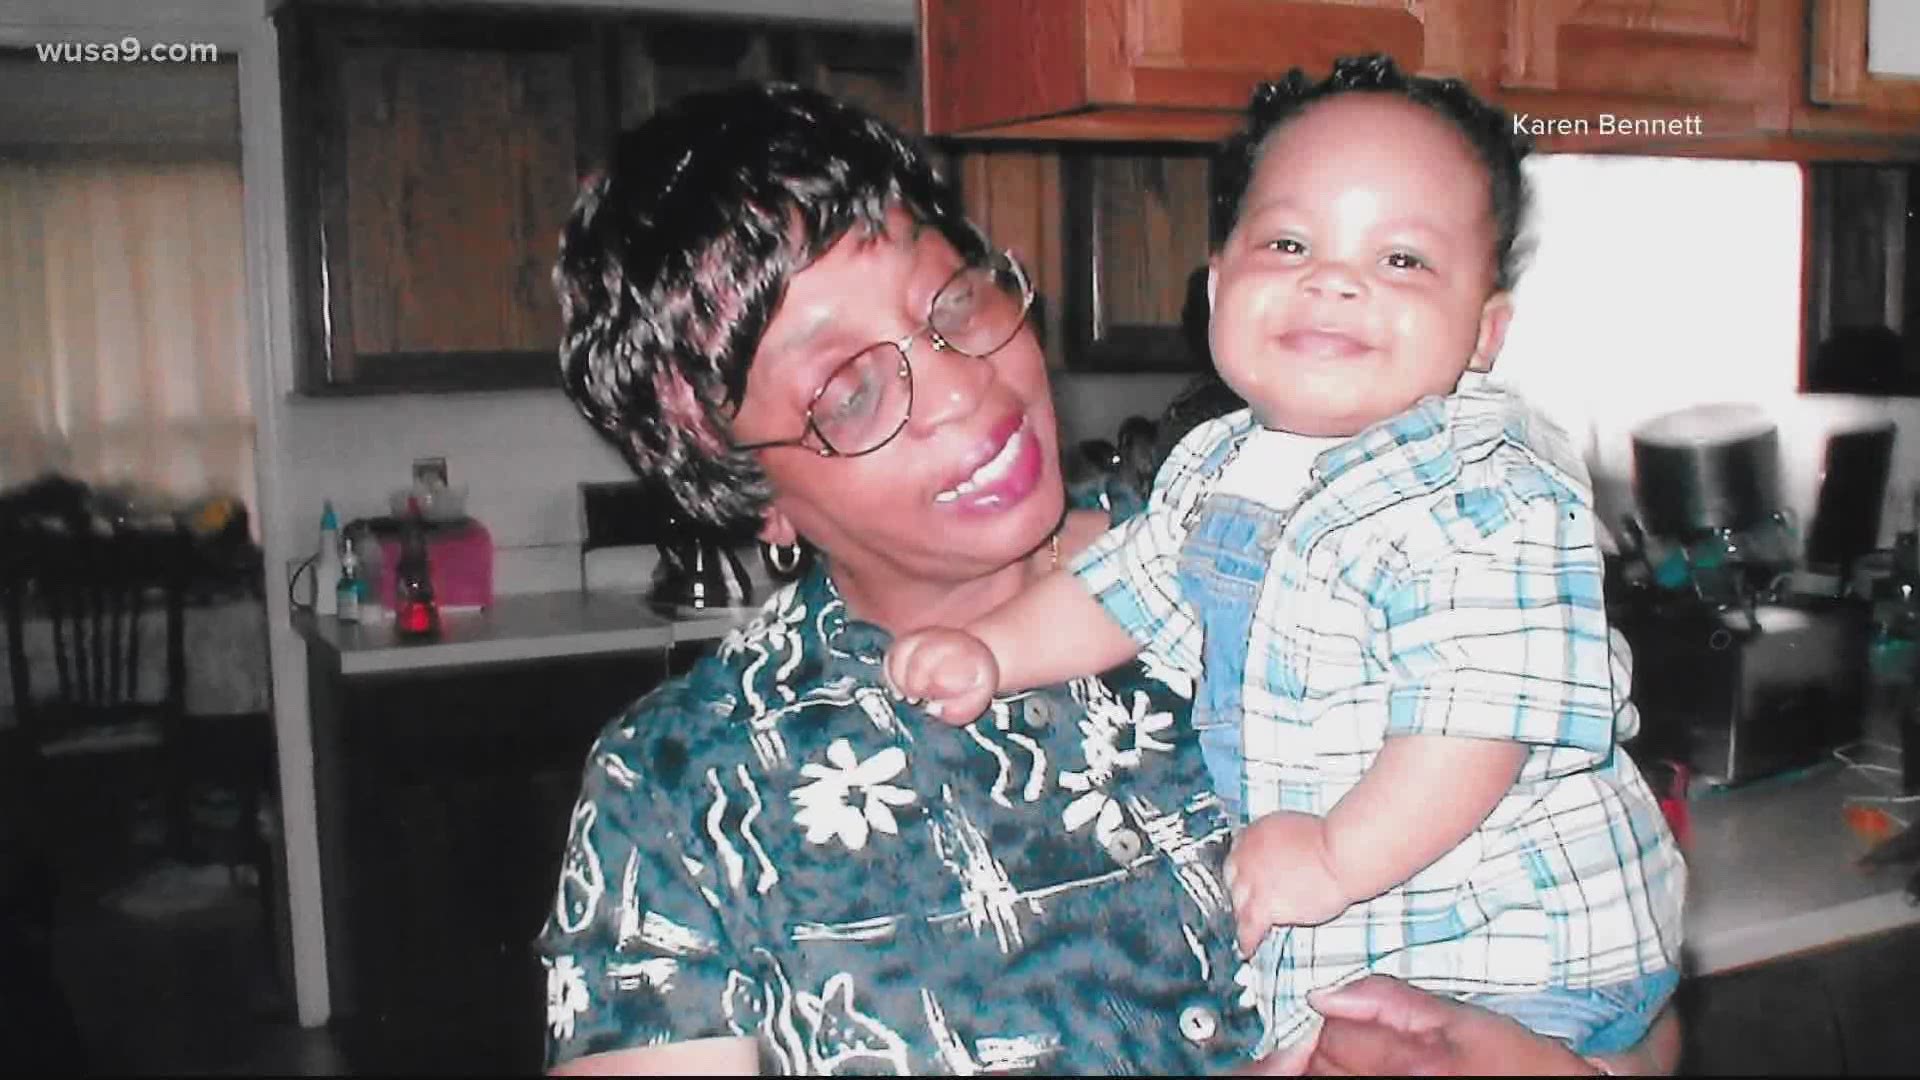 Karen Bennett says her 84-year-old mother was taken off life support by Washington Hospital Center this spring, against the family wishes, as she battled COVID-19.